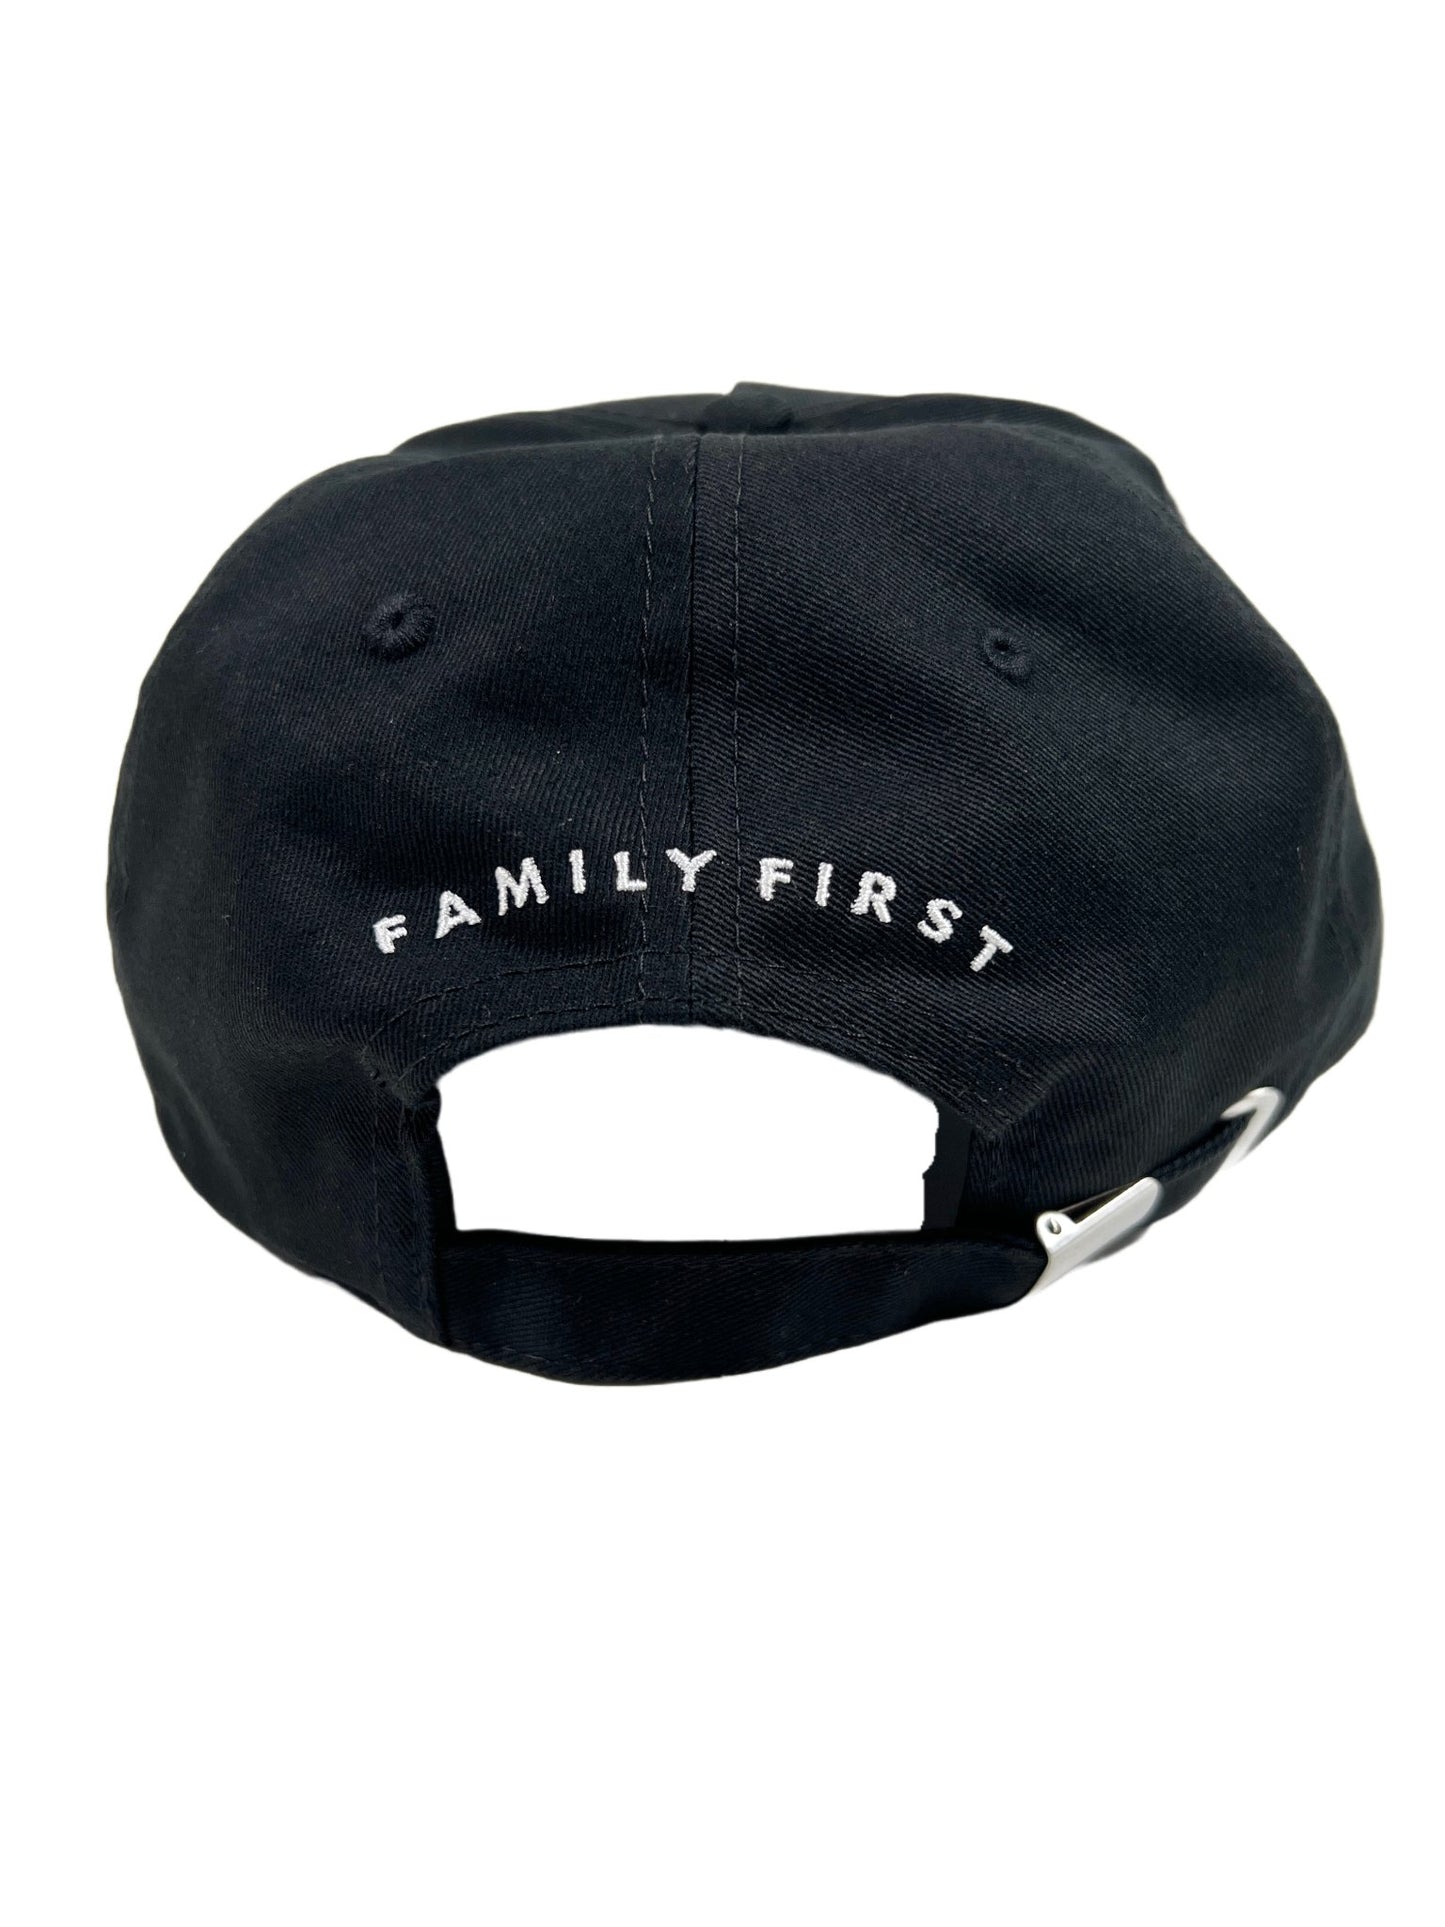 A black embroidered hat with the FAMILY FIRST logo on it, symbolizing family pride.